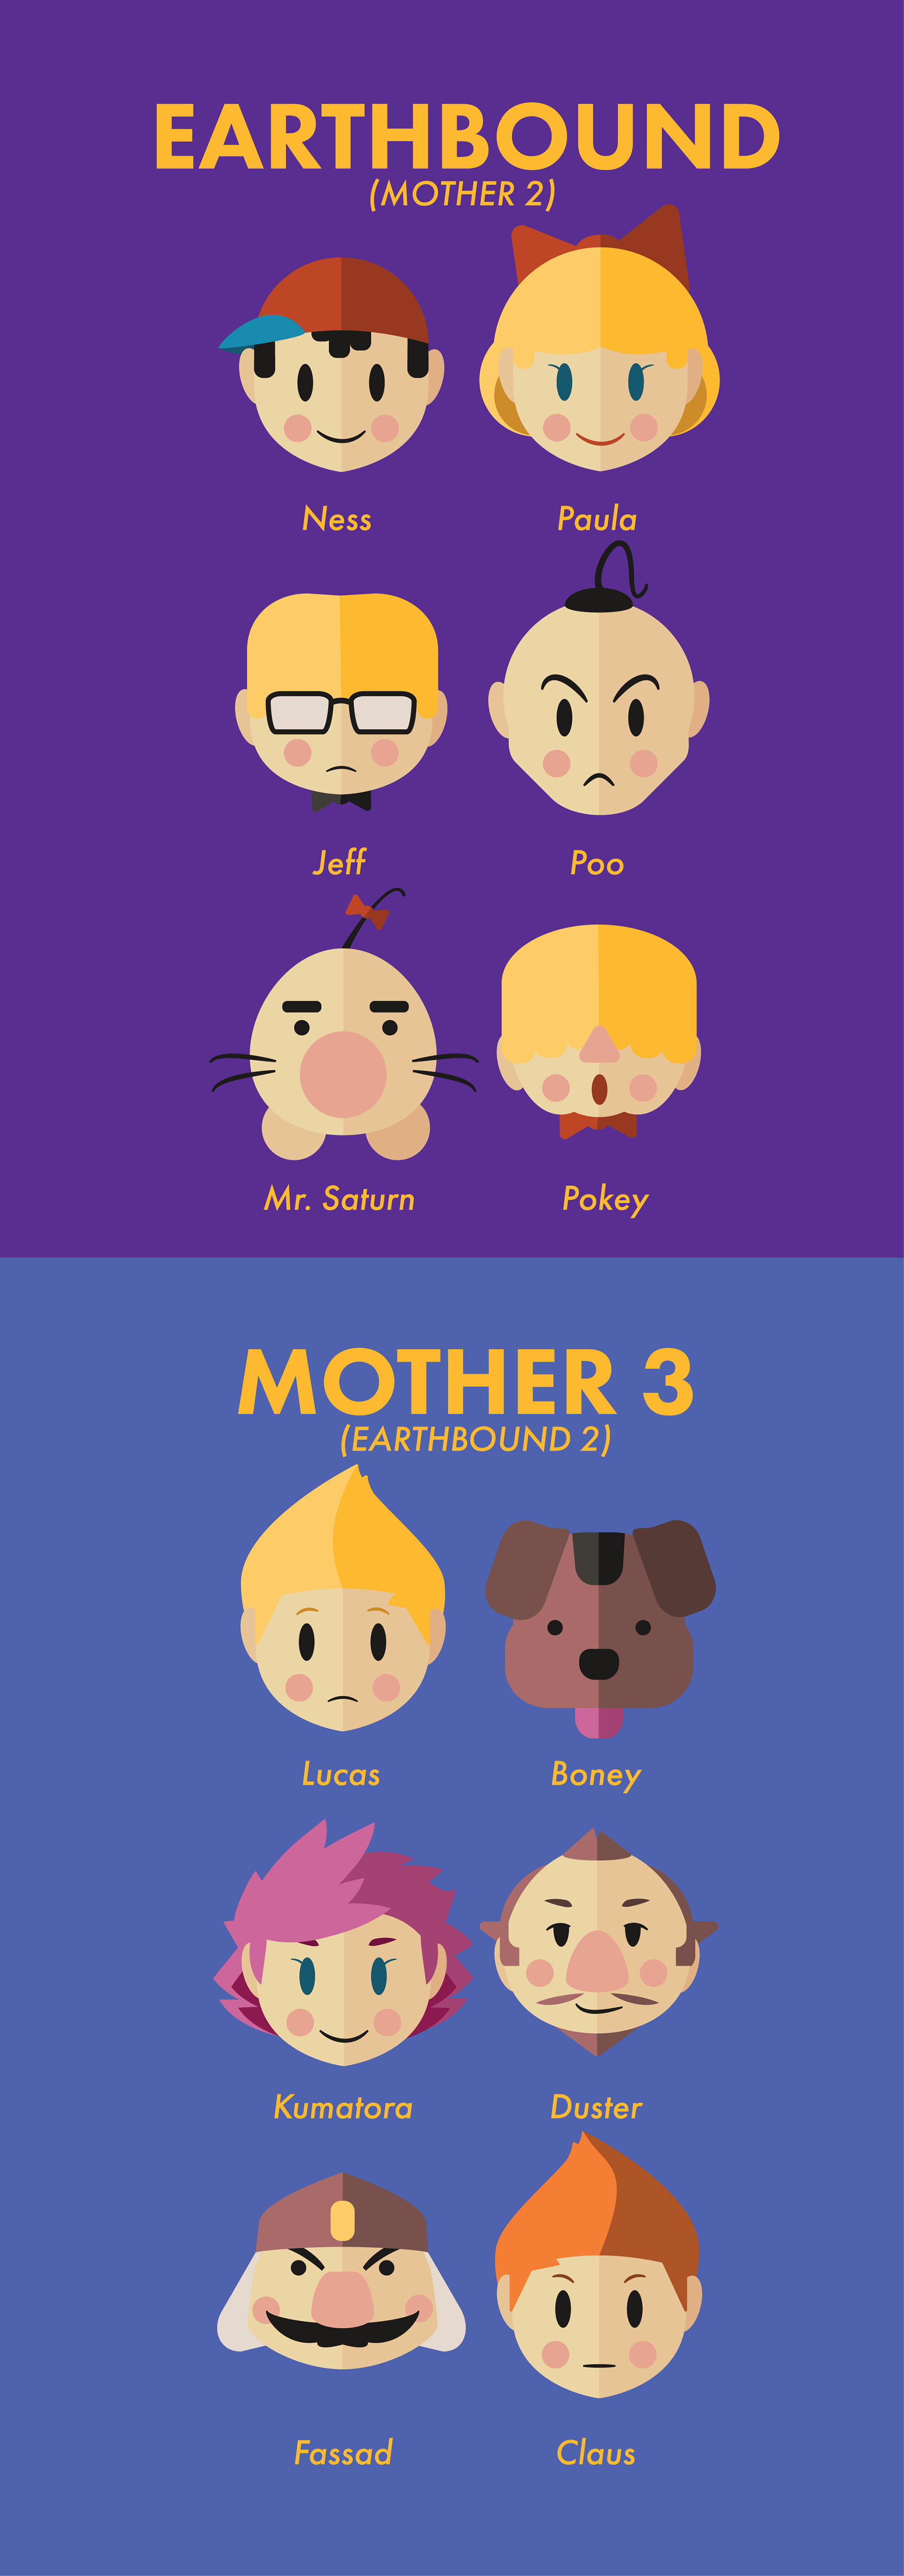 Josh Velasquez - Earthbound and Mother 3 Icons